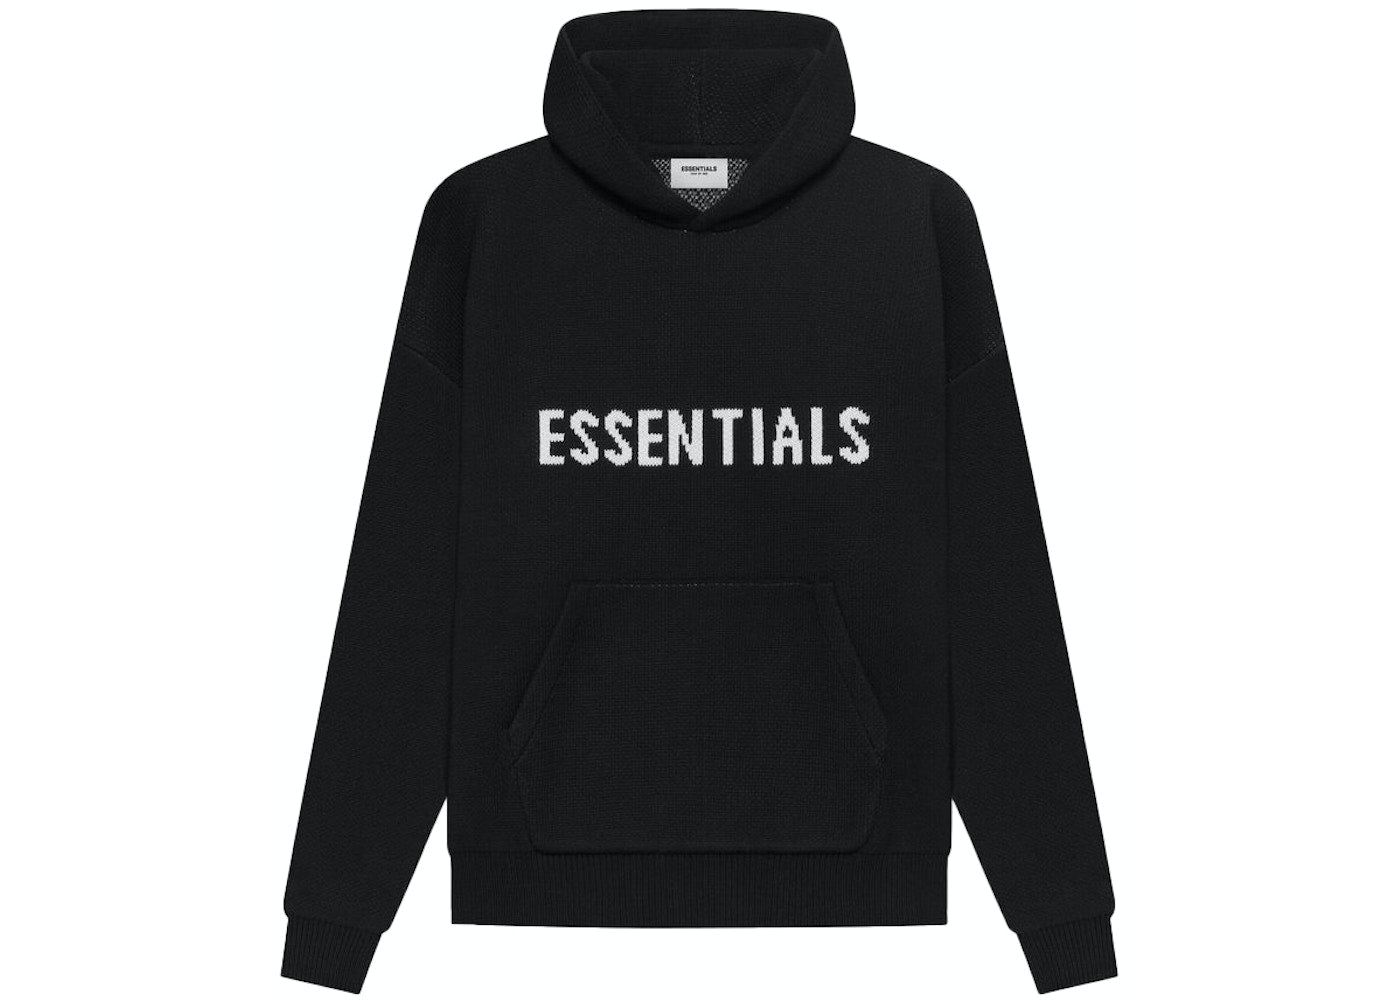 FEAR OF GOD ESSENTIALS KNIT PULLOVER HOODIE (SS21) BLACK